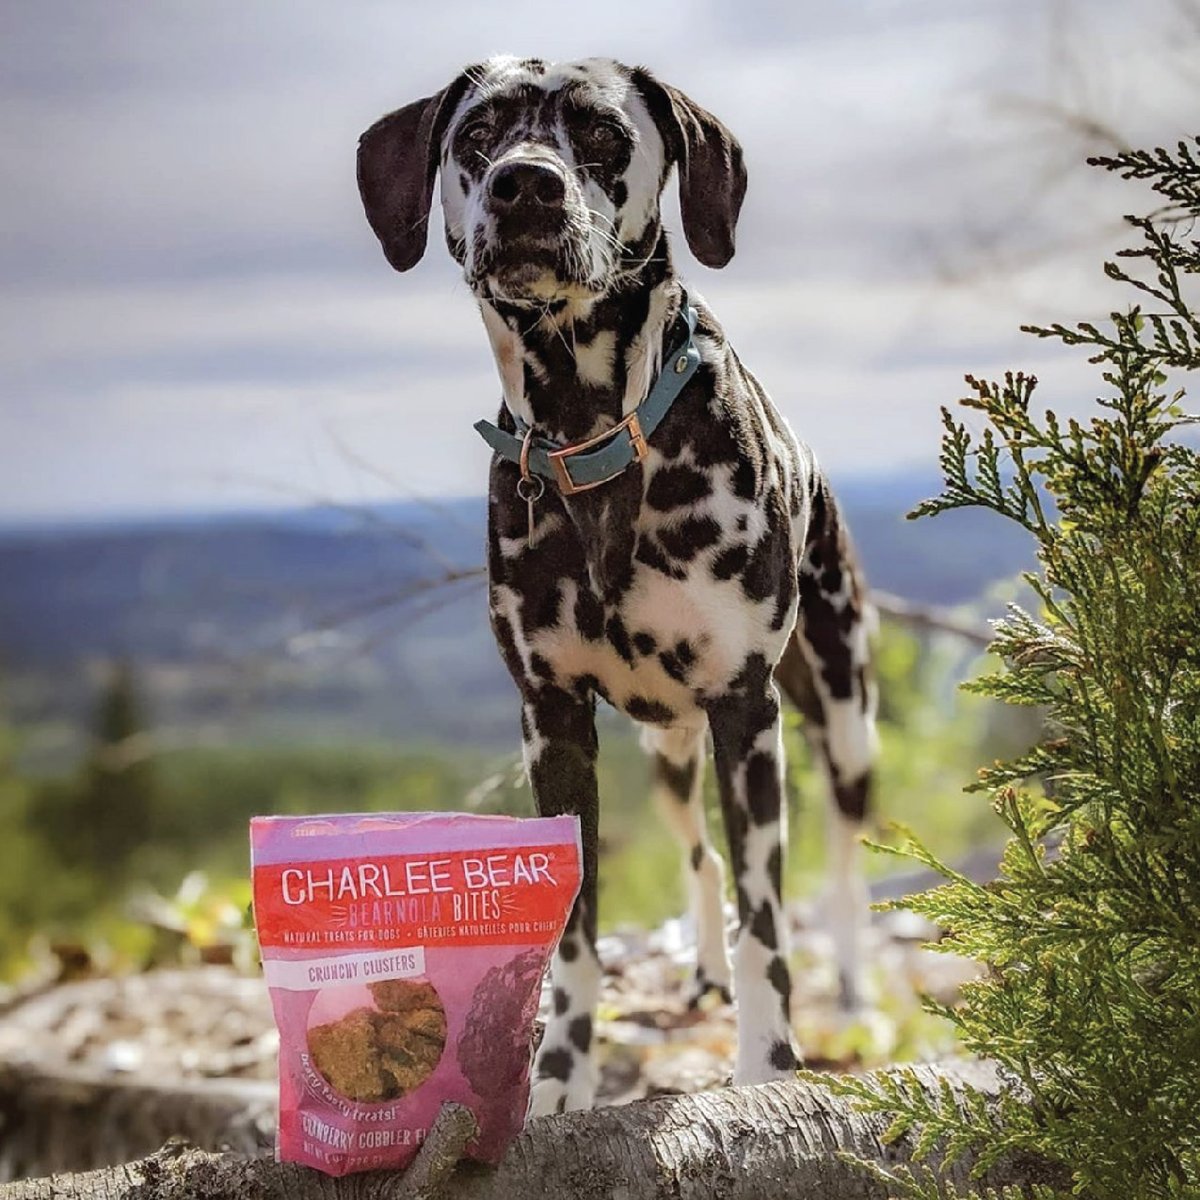 RT if you enjoy the great outdoors 🌲 with your pups.
“These were a perfect snack for all the #dogs when we reached the top! All the dogs definitely enjoyed them.”
📷: @corathedalmatian
#snacktime #dalmatian #treats #outside